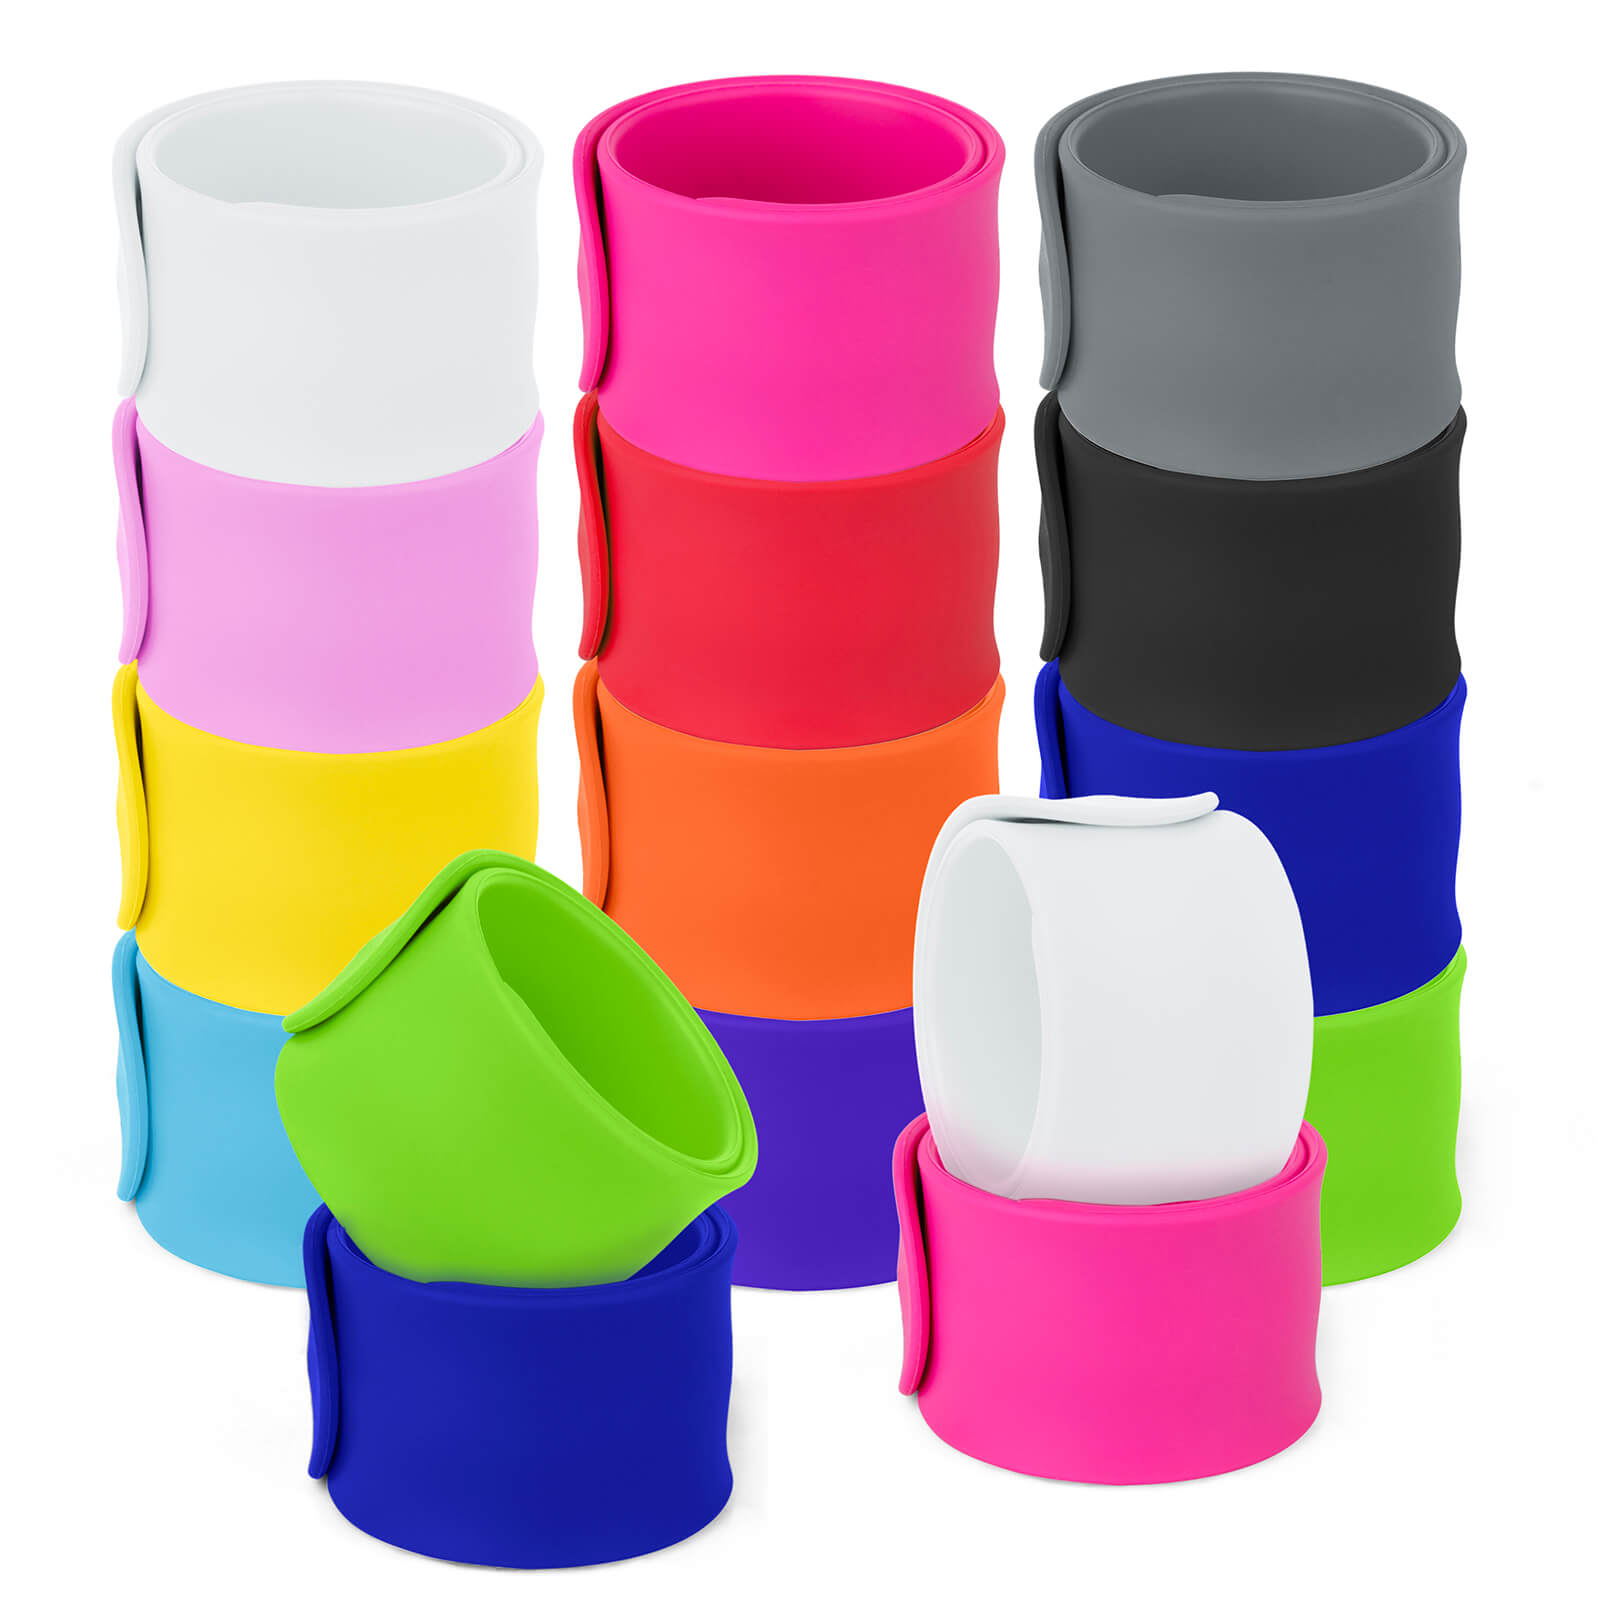 GOGO Personalized Silicone Slap Bracelets, Soft Rubber Wristband for Party Favors